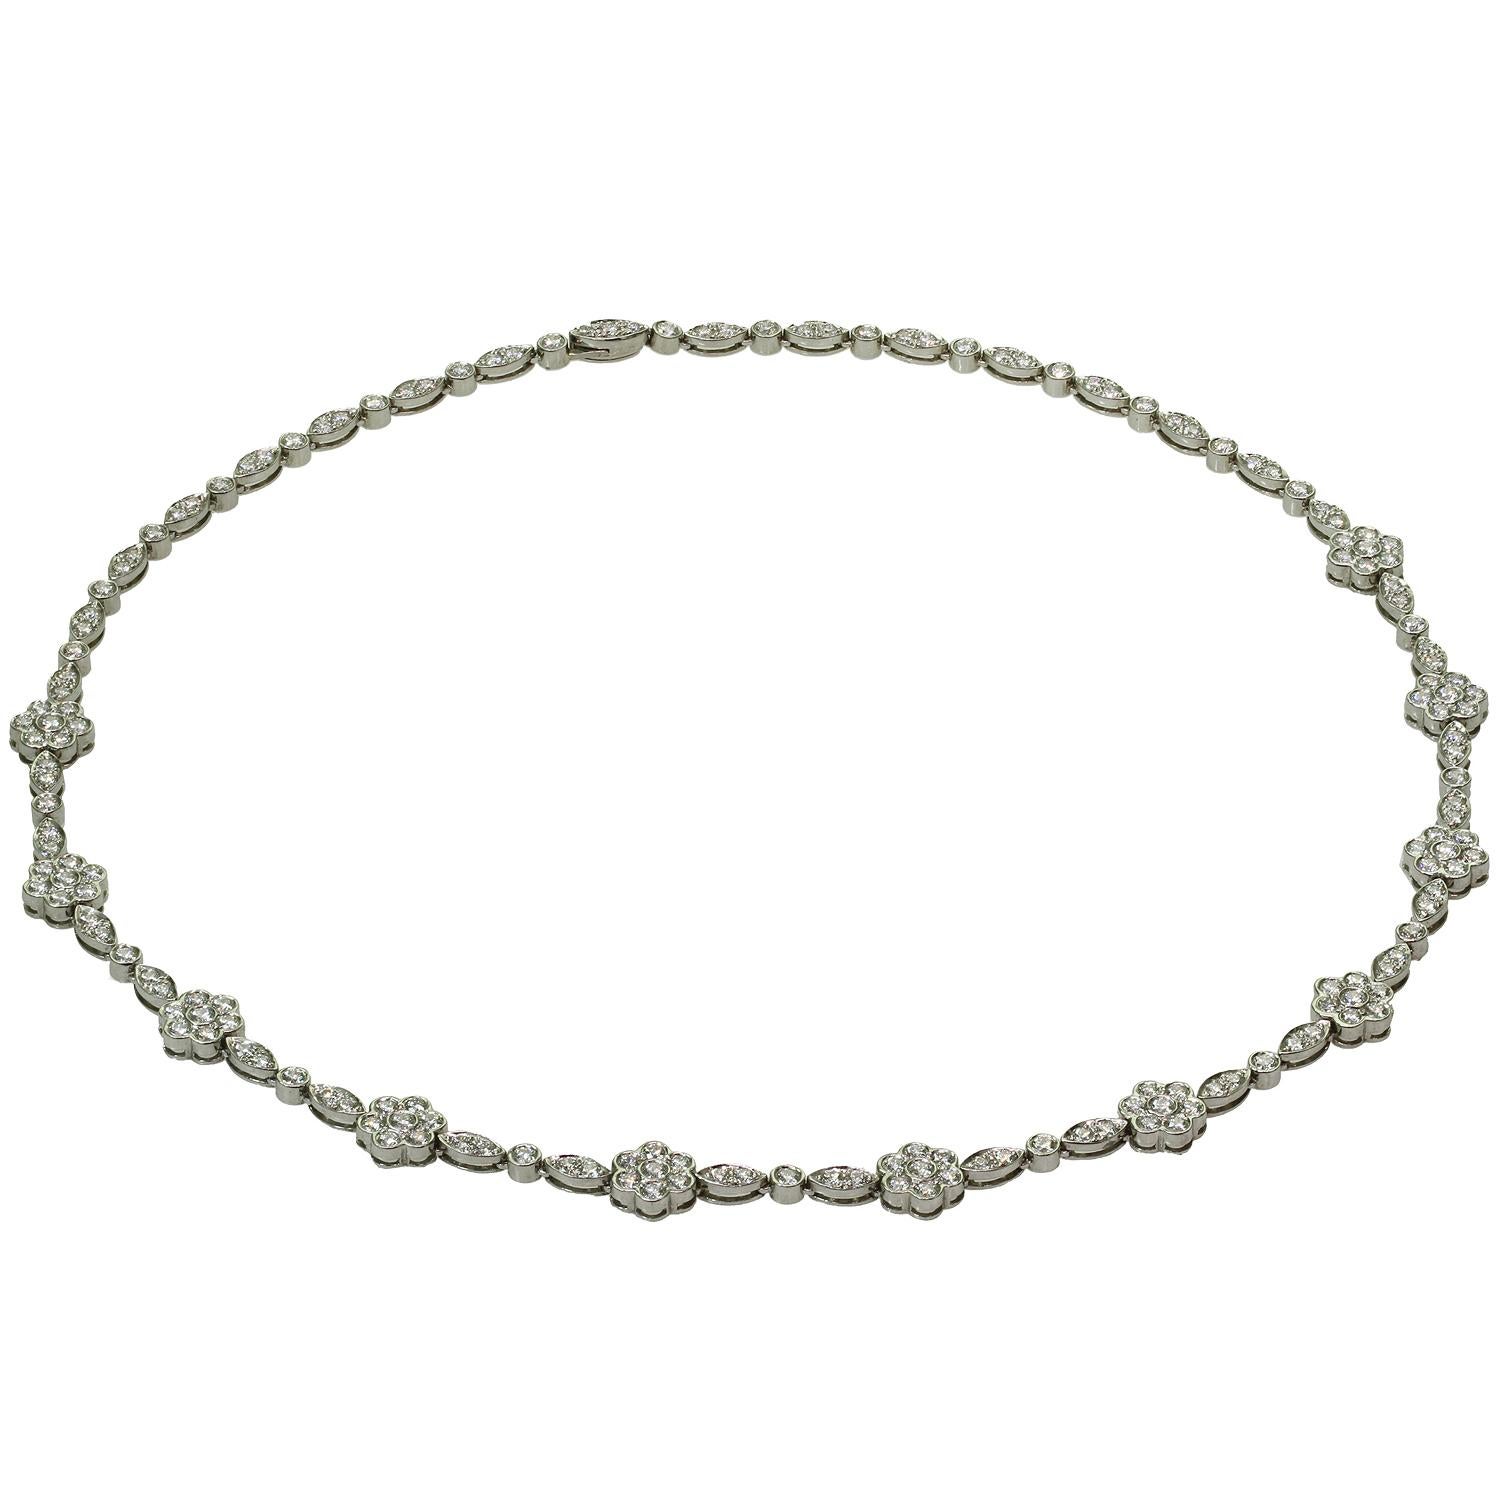 This exquisite Tiffany necklace from the delicate Garden Flower collection features a sparkling floral and geometric links crafted in platinum and set with about 178 brilliant-cut round diamonds of an esimated 8.0 carats. Made in United States circa